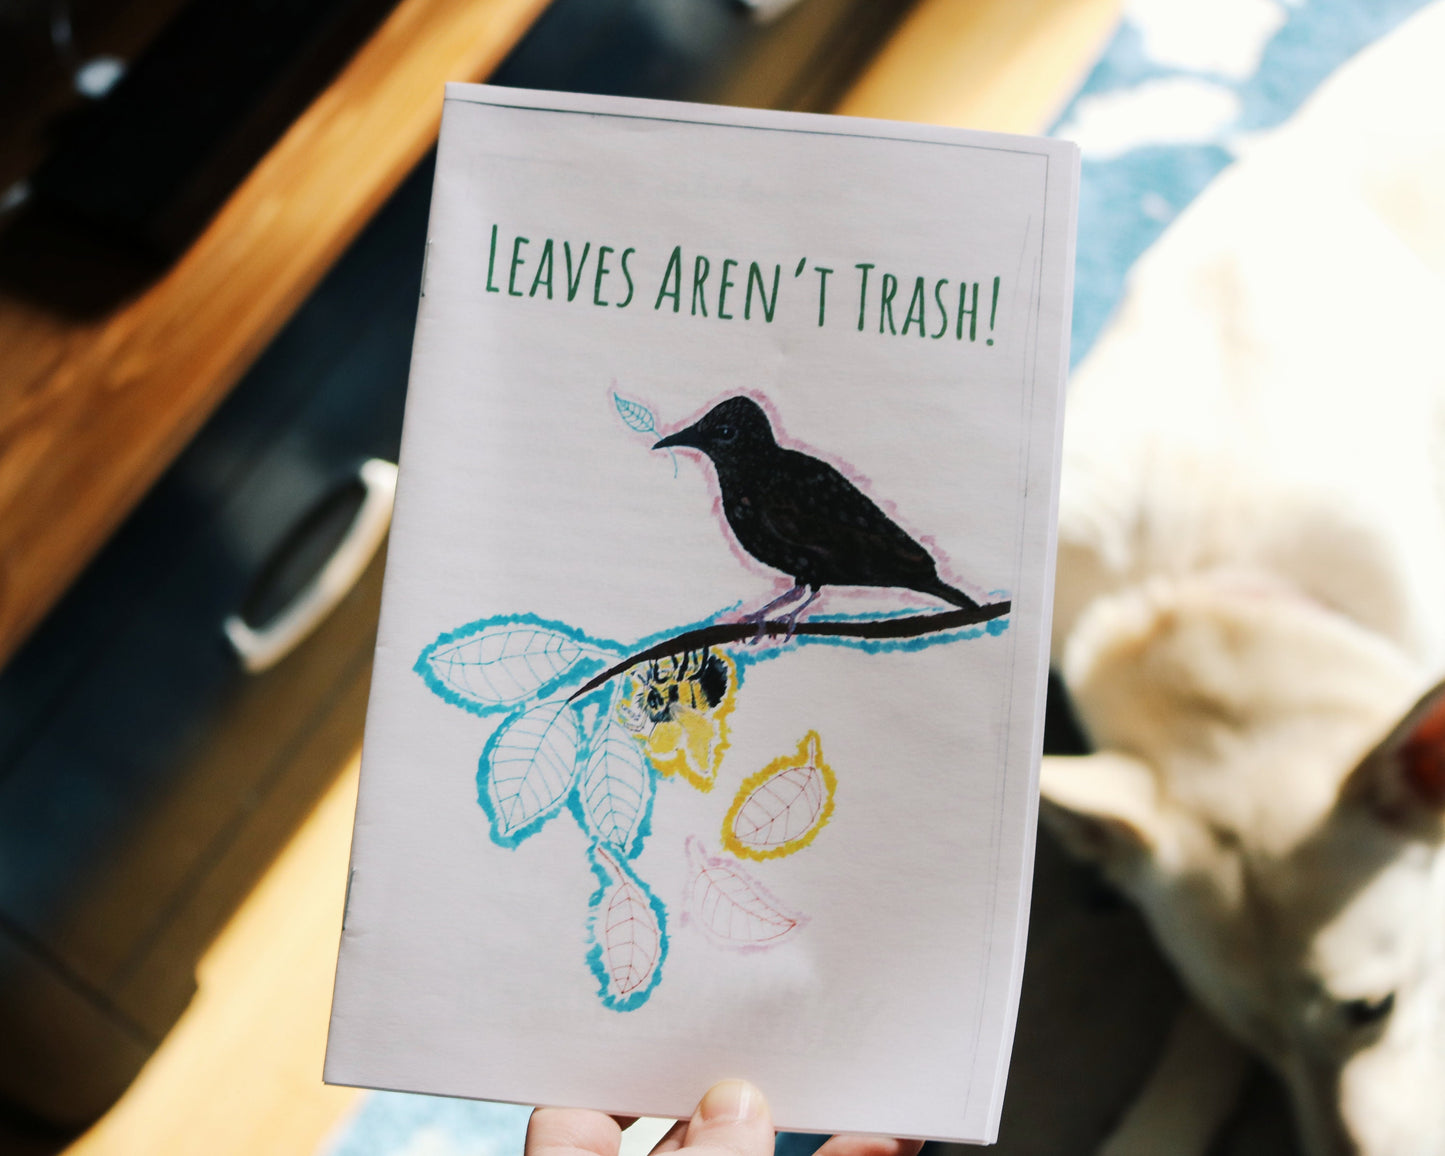 Eco-zine, Recycling- Leaves Aren't Trash: A Zine on the Importance of Leaves | Composting, Ecosystem, Self Sufficiency Self-Published Guide